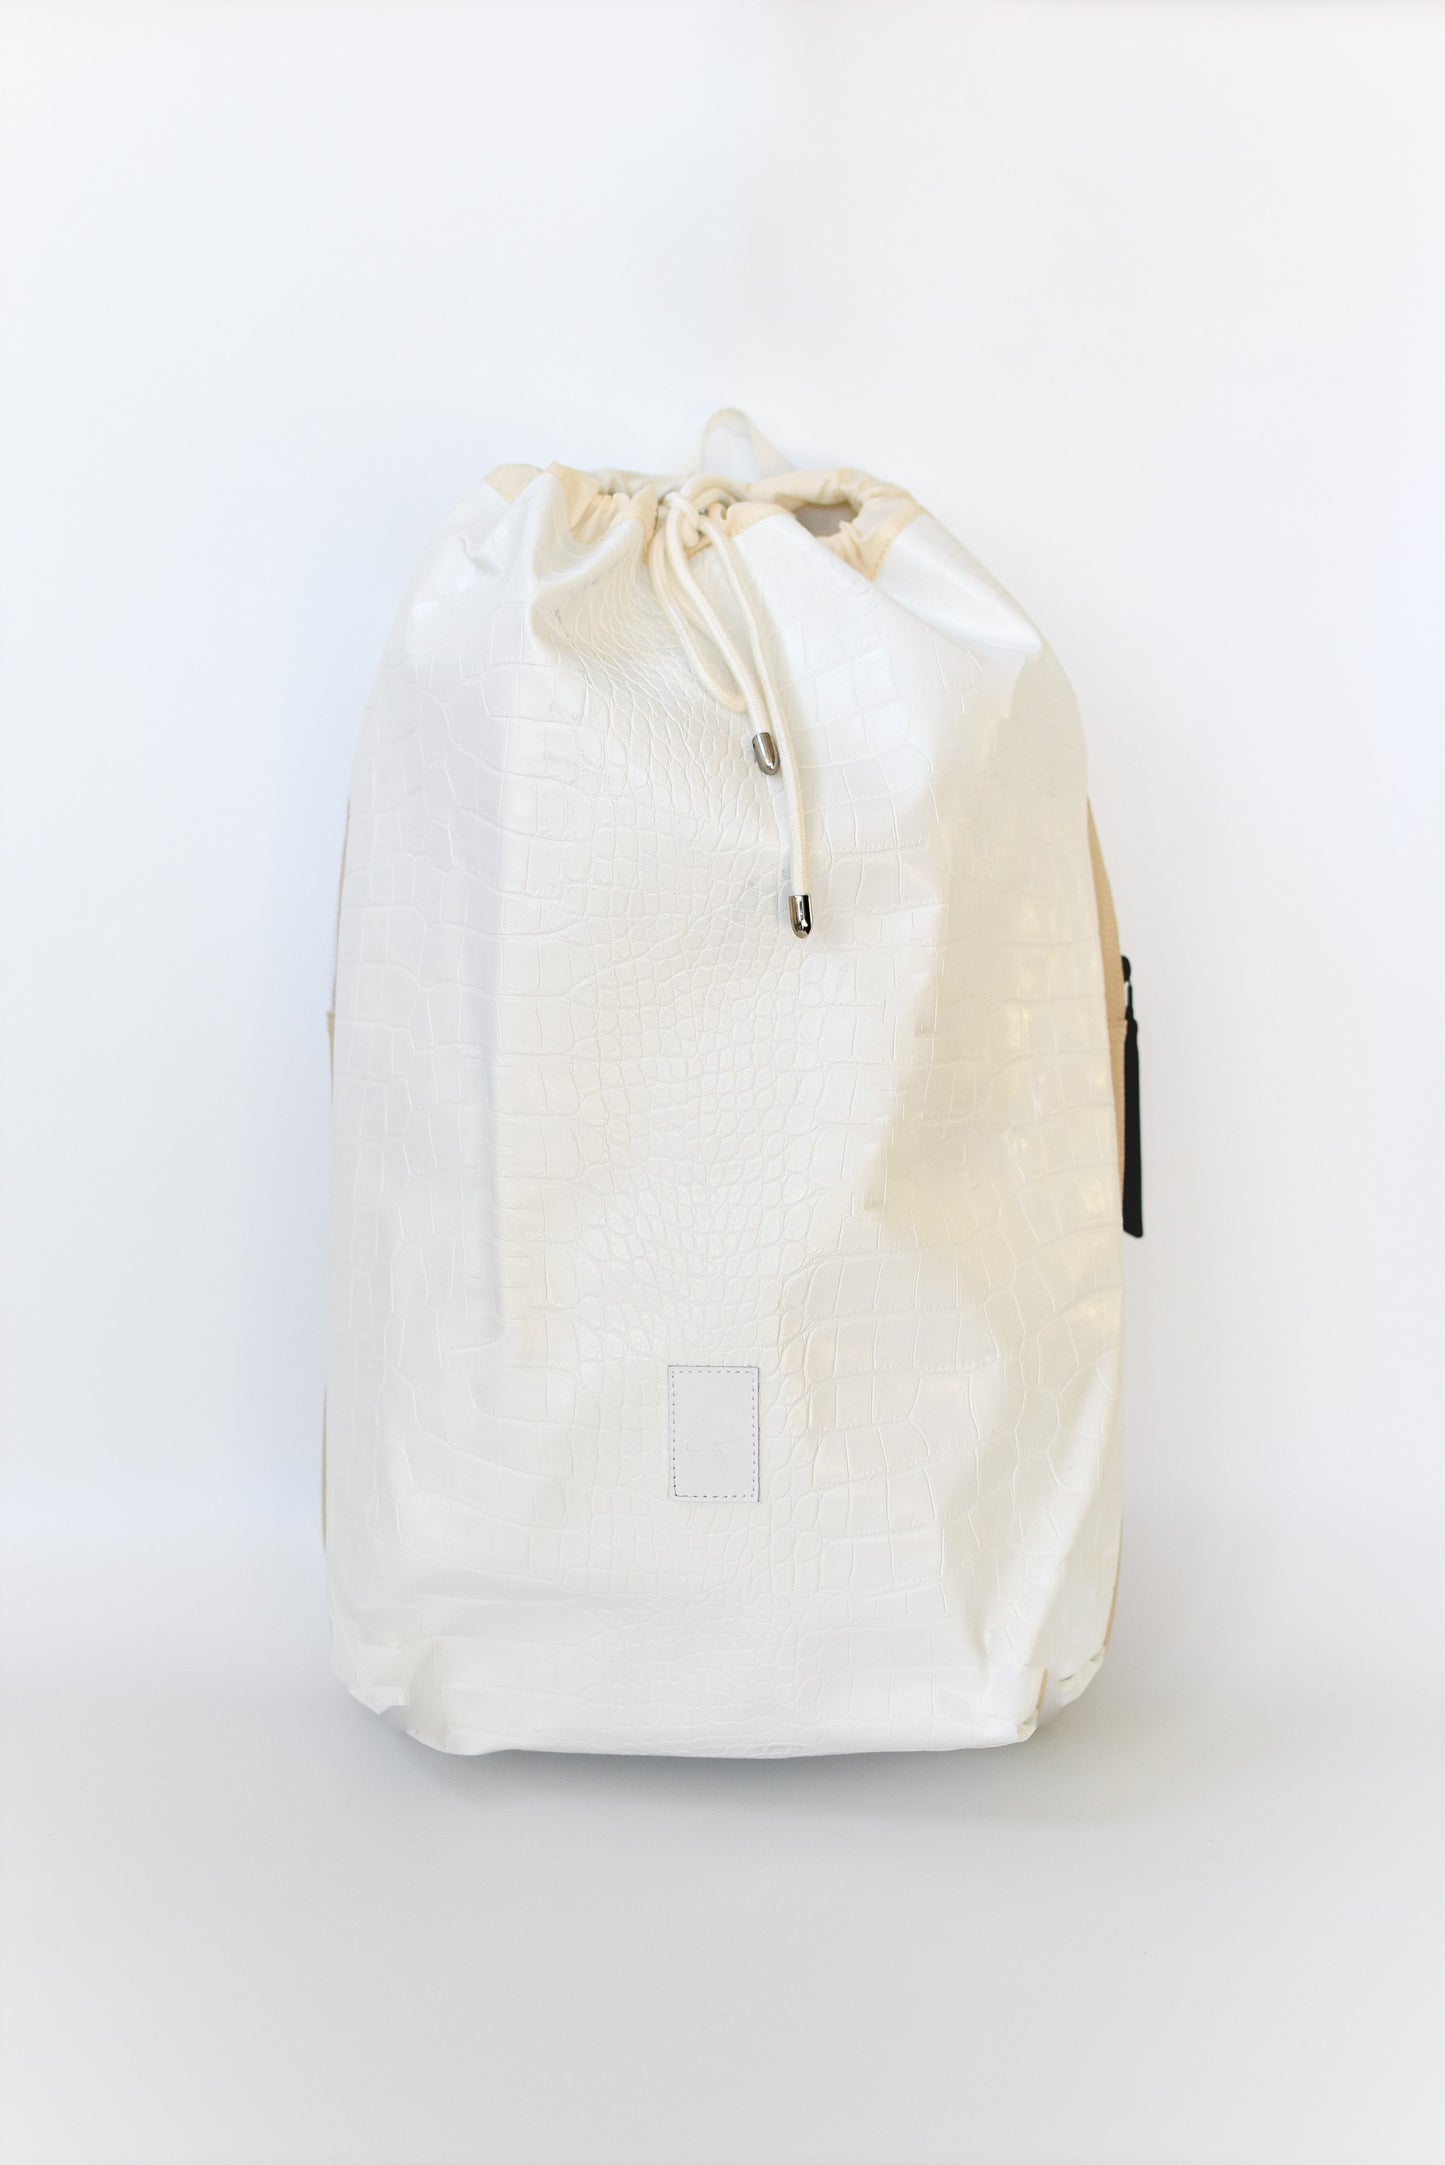 Off white faux croc embossed Casselberry backpack with cinch top and back zipper compartment.